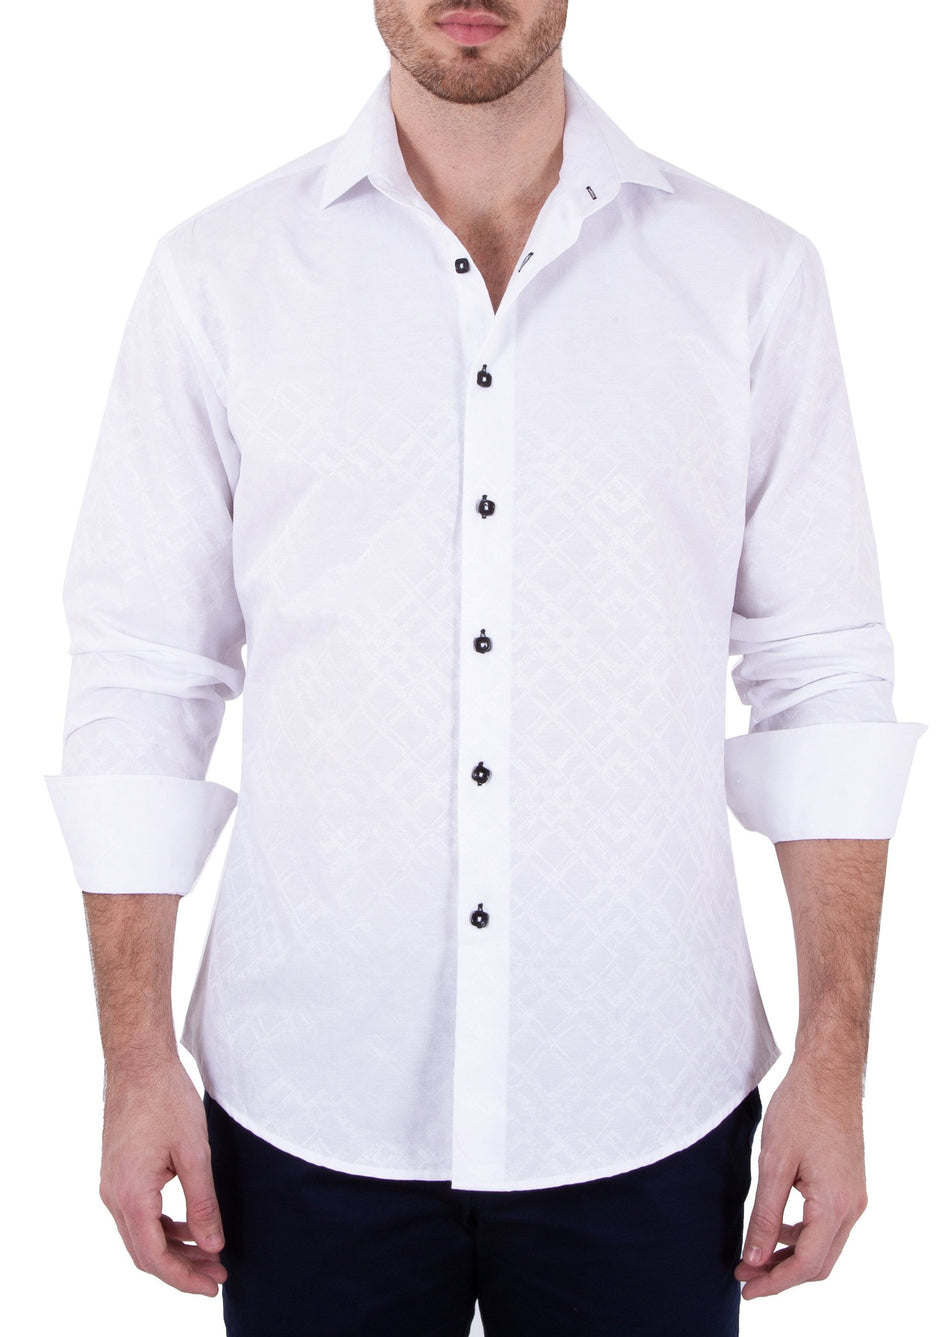 Men's White Textured Long Sleeve Button Up